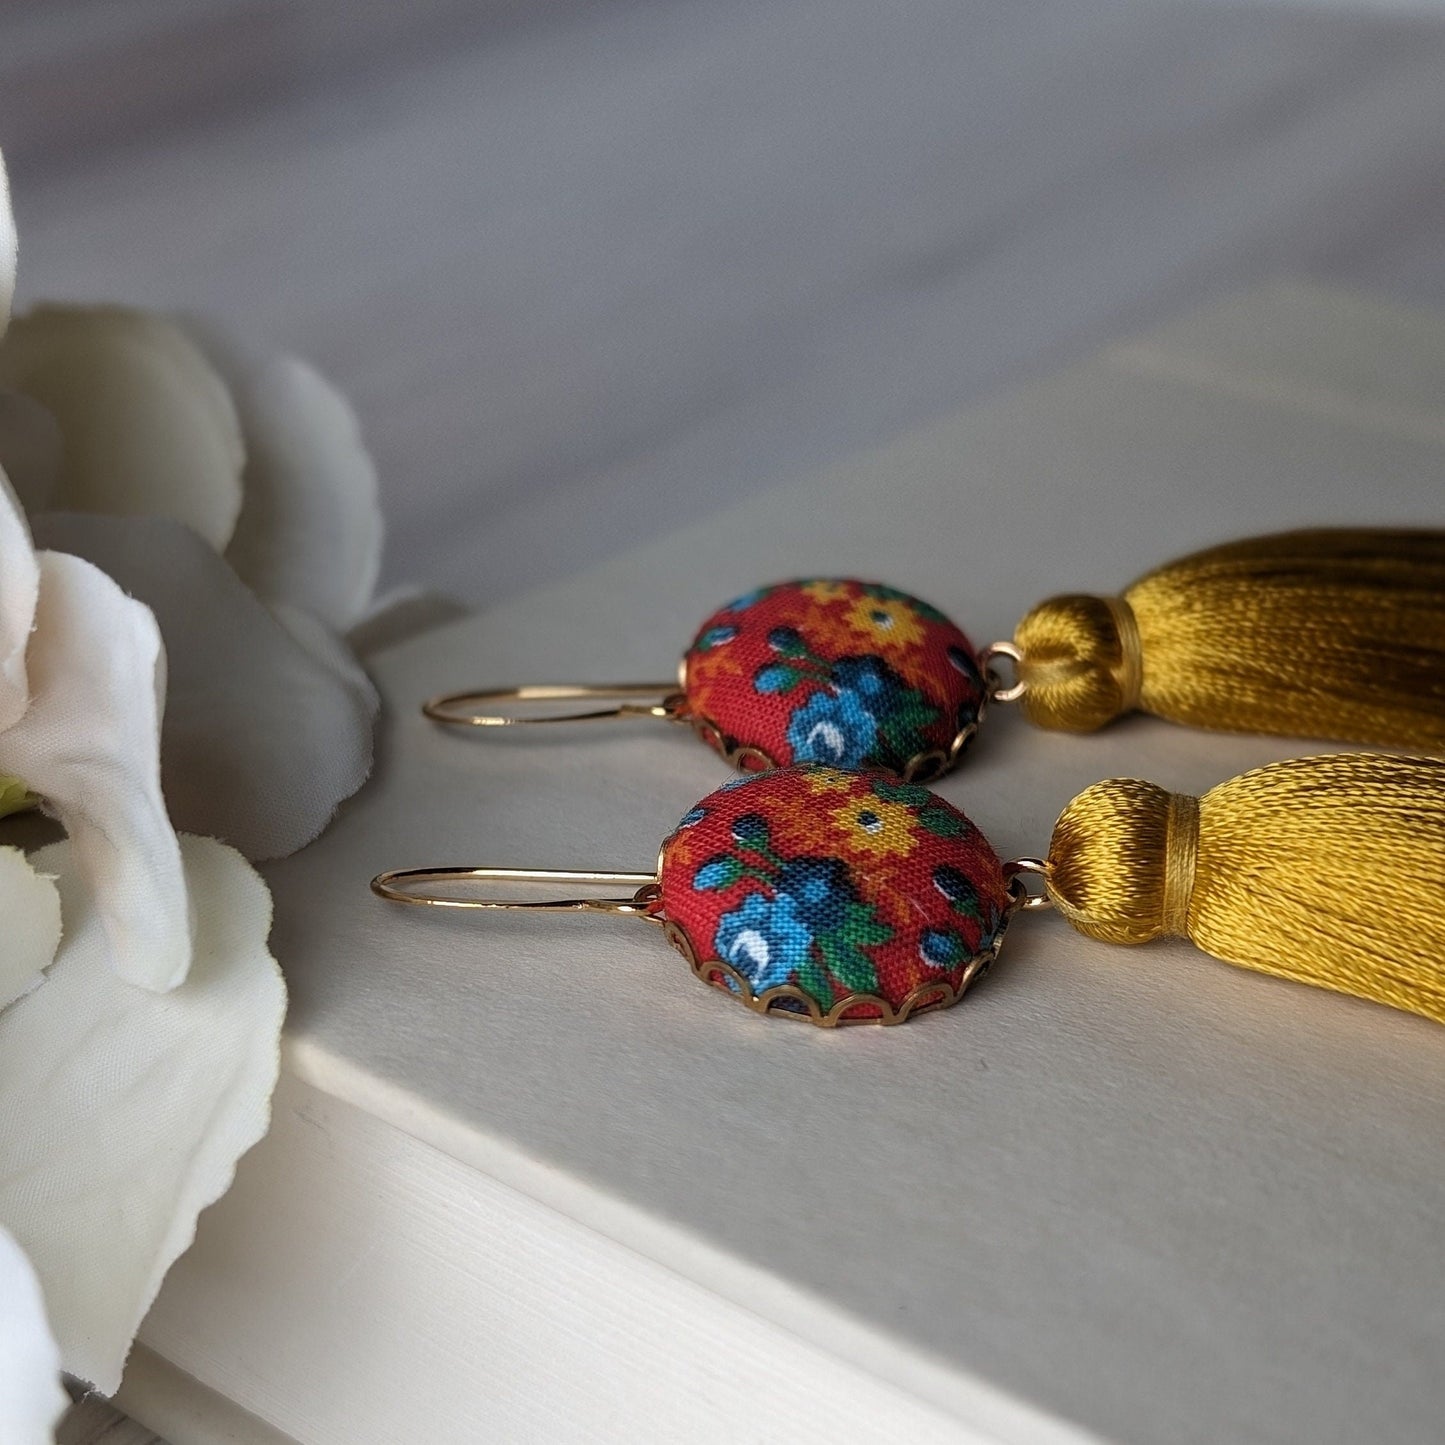 Colorful Funky Earrings Handmade With Vintage Floral Fabric In Primary Colors